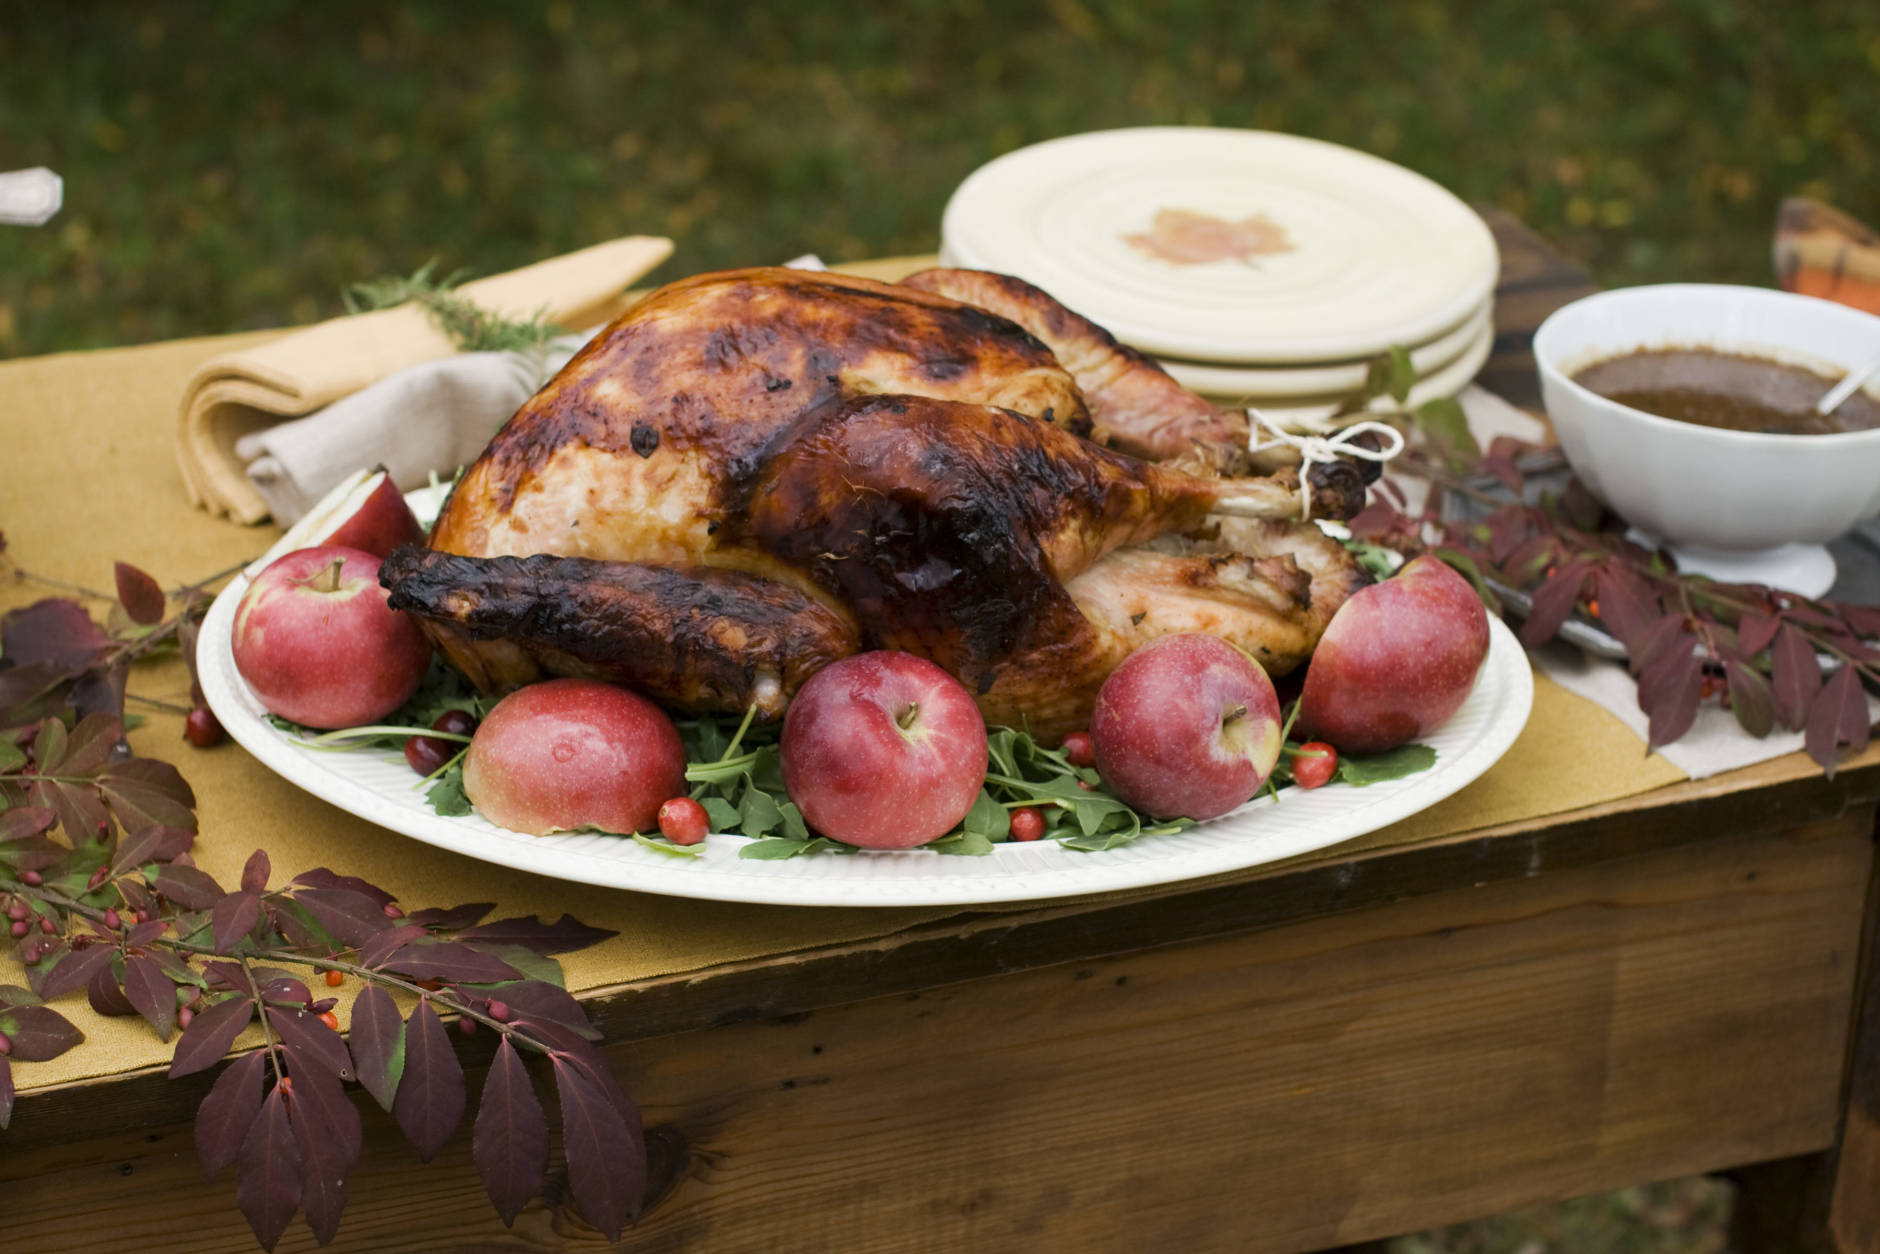 In this image taken on Oct. 8, 2012, cider brined turkey and sage gravy are shown in Concord, N.H. (AP Photo/Matthew Mead)